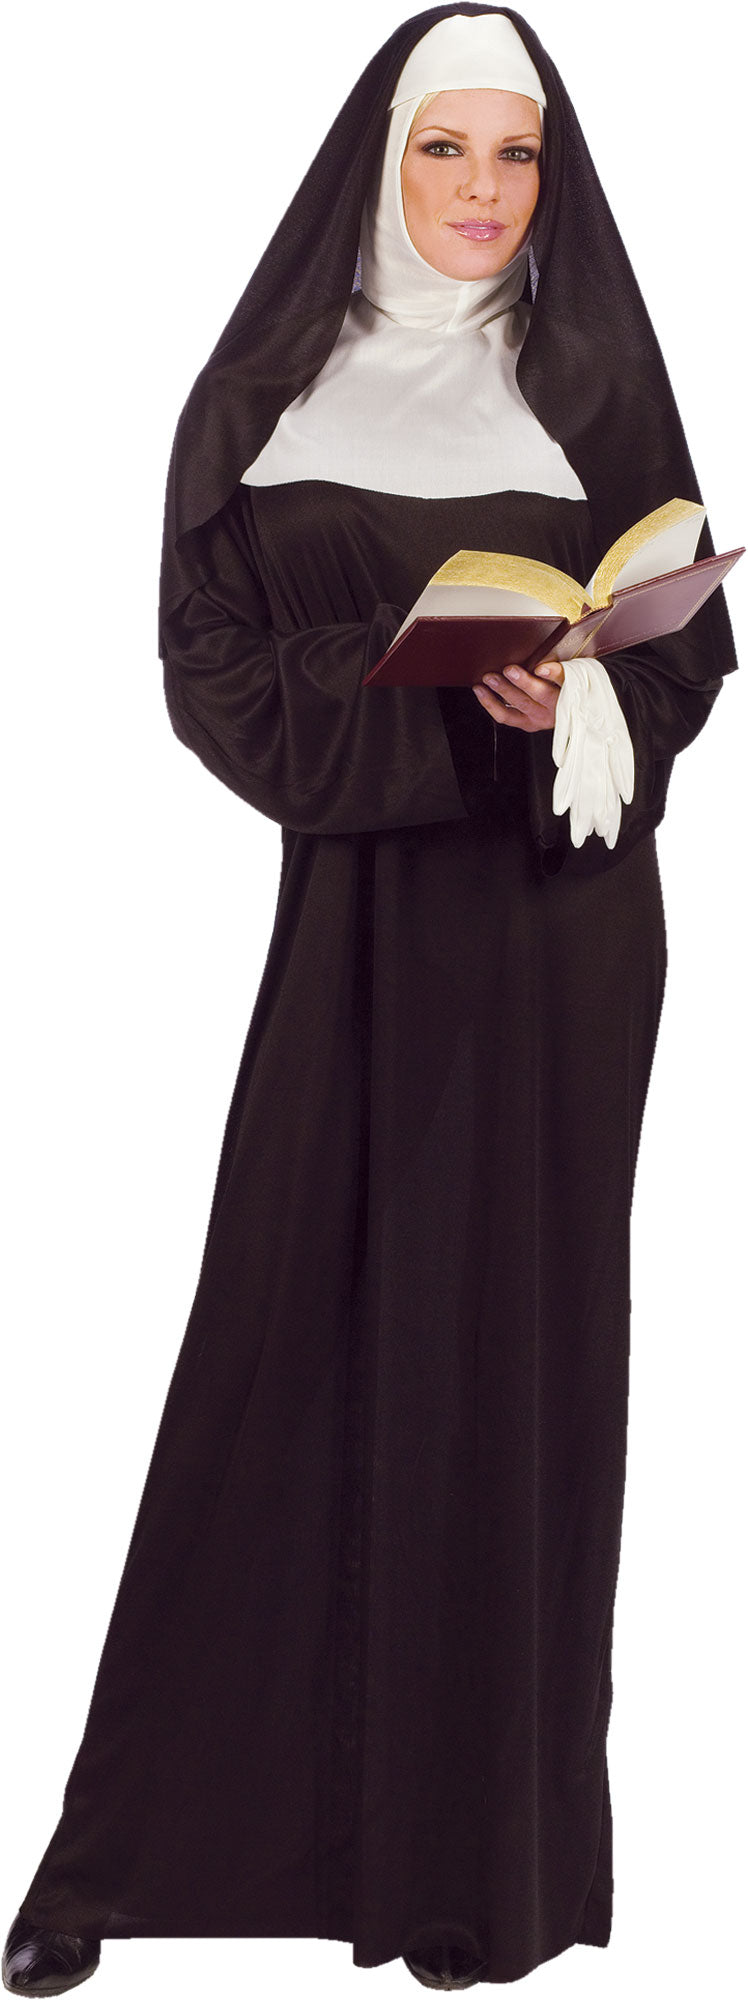 Mother Superior Adult Costume - One Size